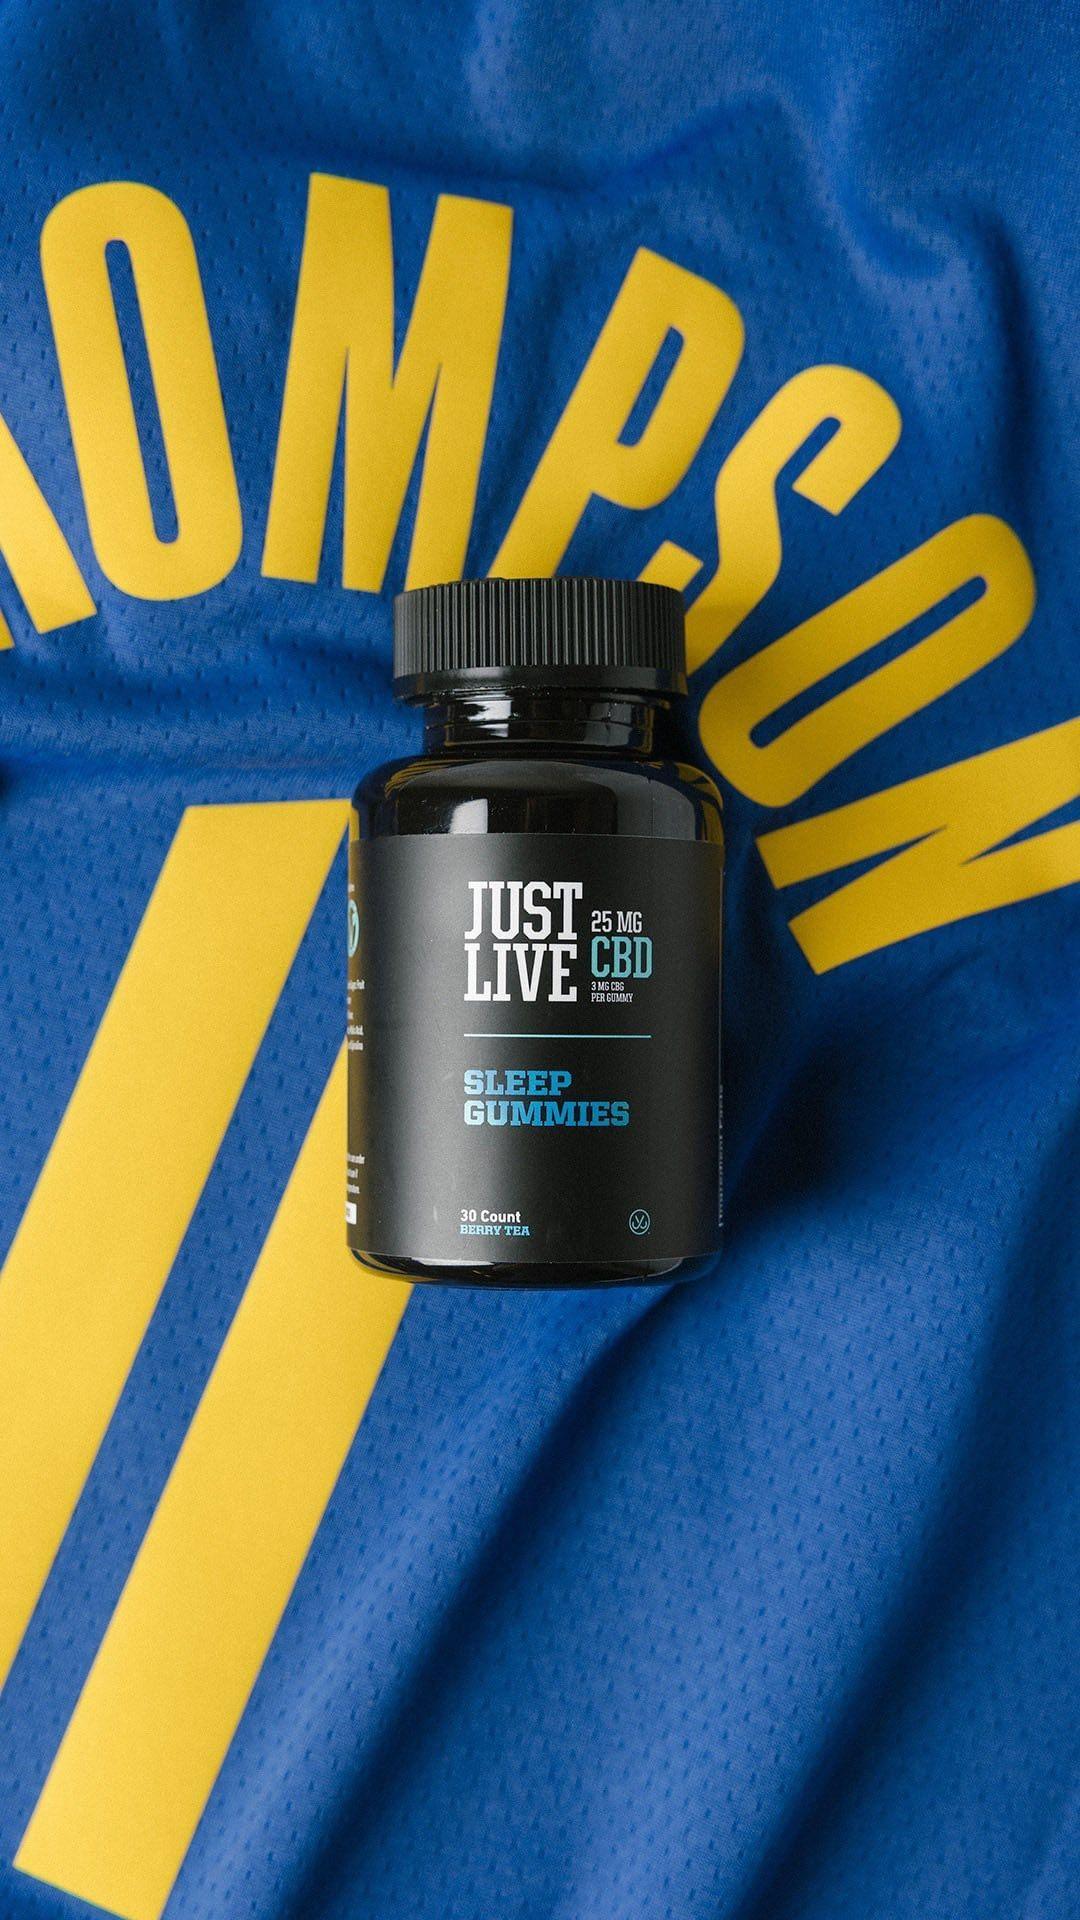 class="content__text"
 We will let our co-founder and 4x NBA Champion, @klaythompson , let you know how you can perform your best every day!

 #athletefounded #naturegrounded #justlive #itworksforme #liverested #allnatural #klaythompson #justlivecommunity 
 